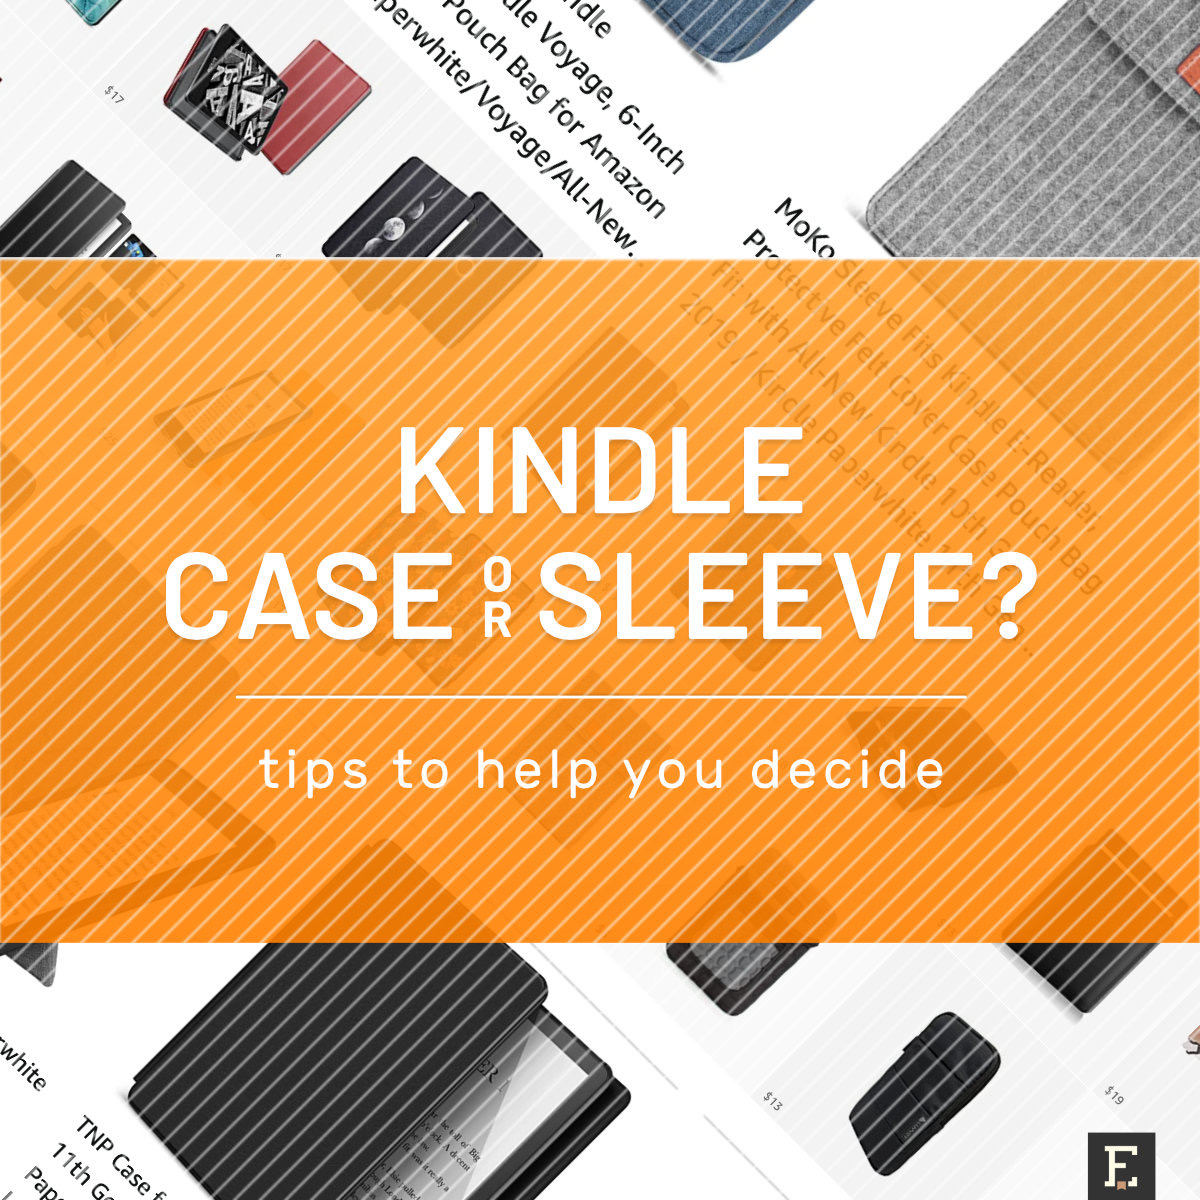 Kindle case vs sleeve - which better